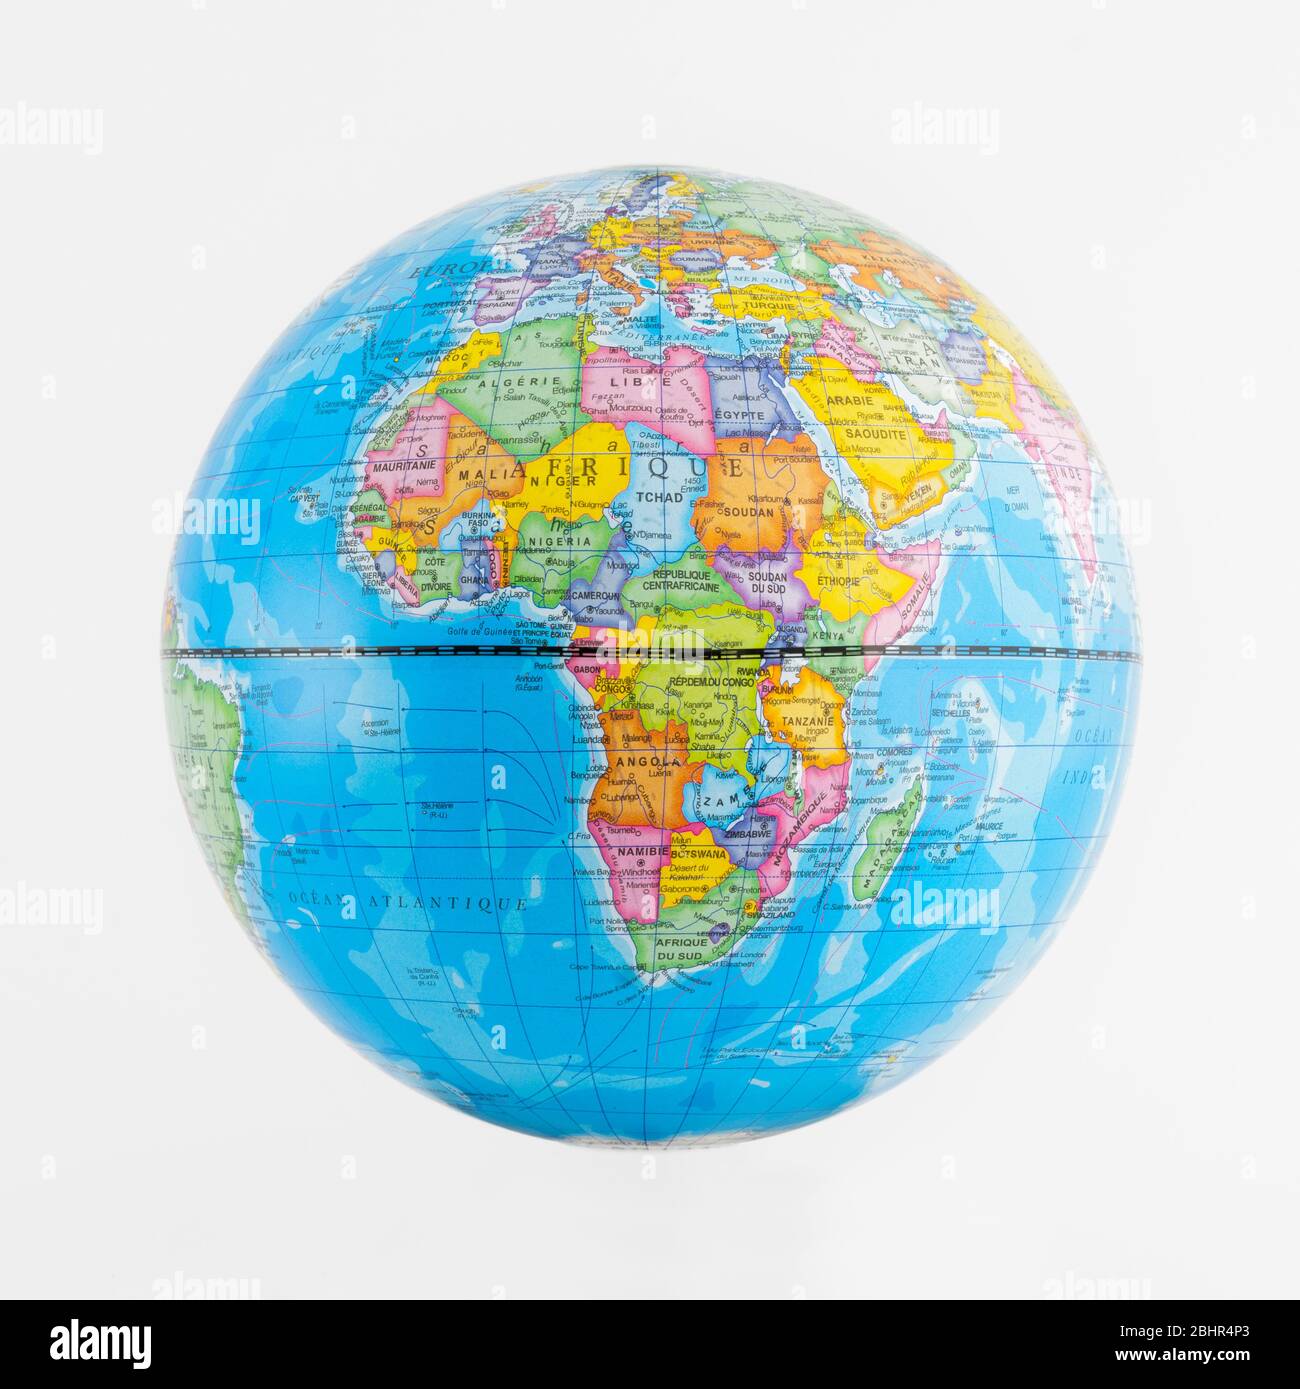 Earth globe with continents maps Stock Photo